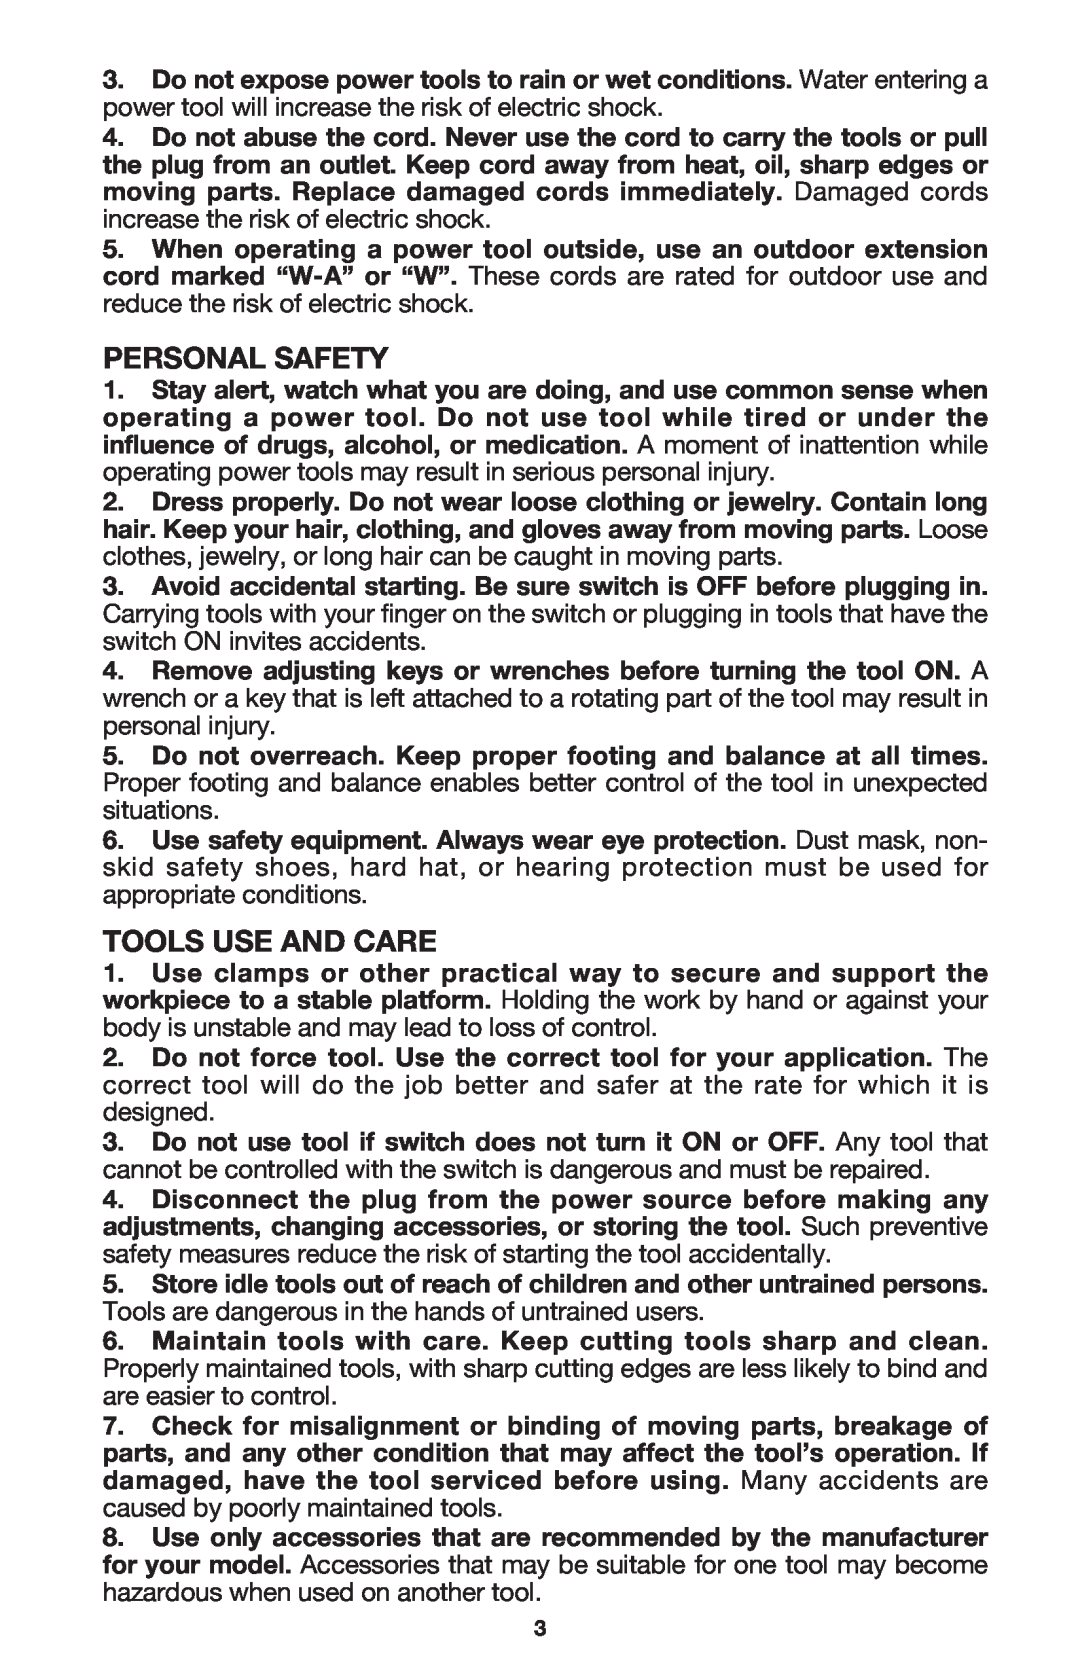 Porter-Cable 7537, 7536 instruction manual Personal Safety, Tools Use And Care 